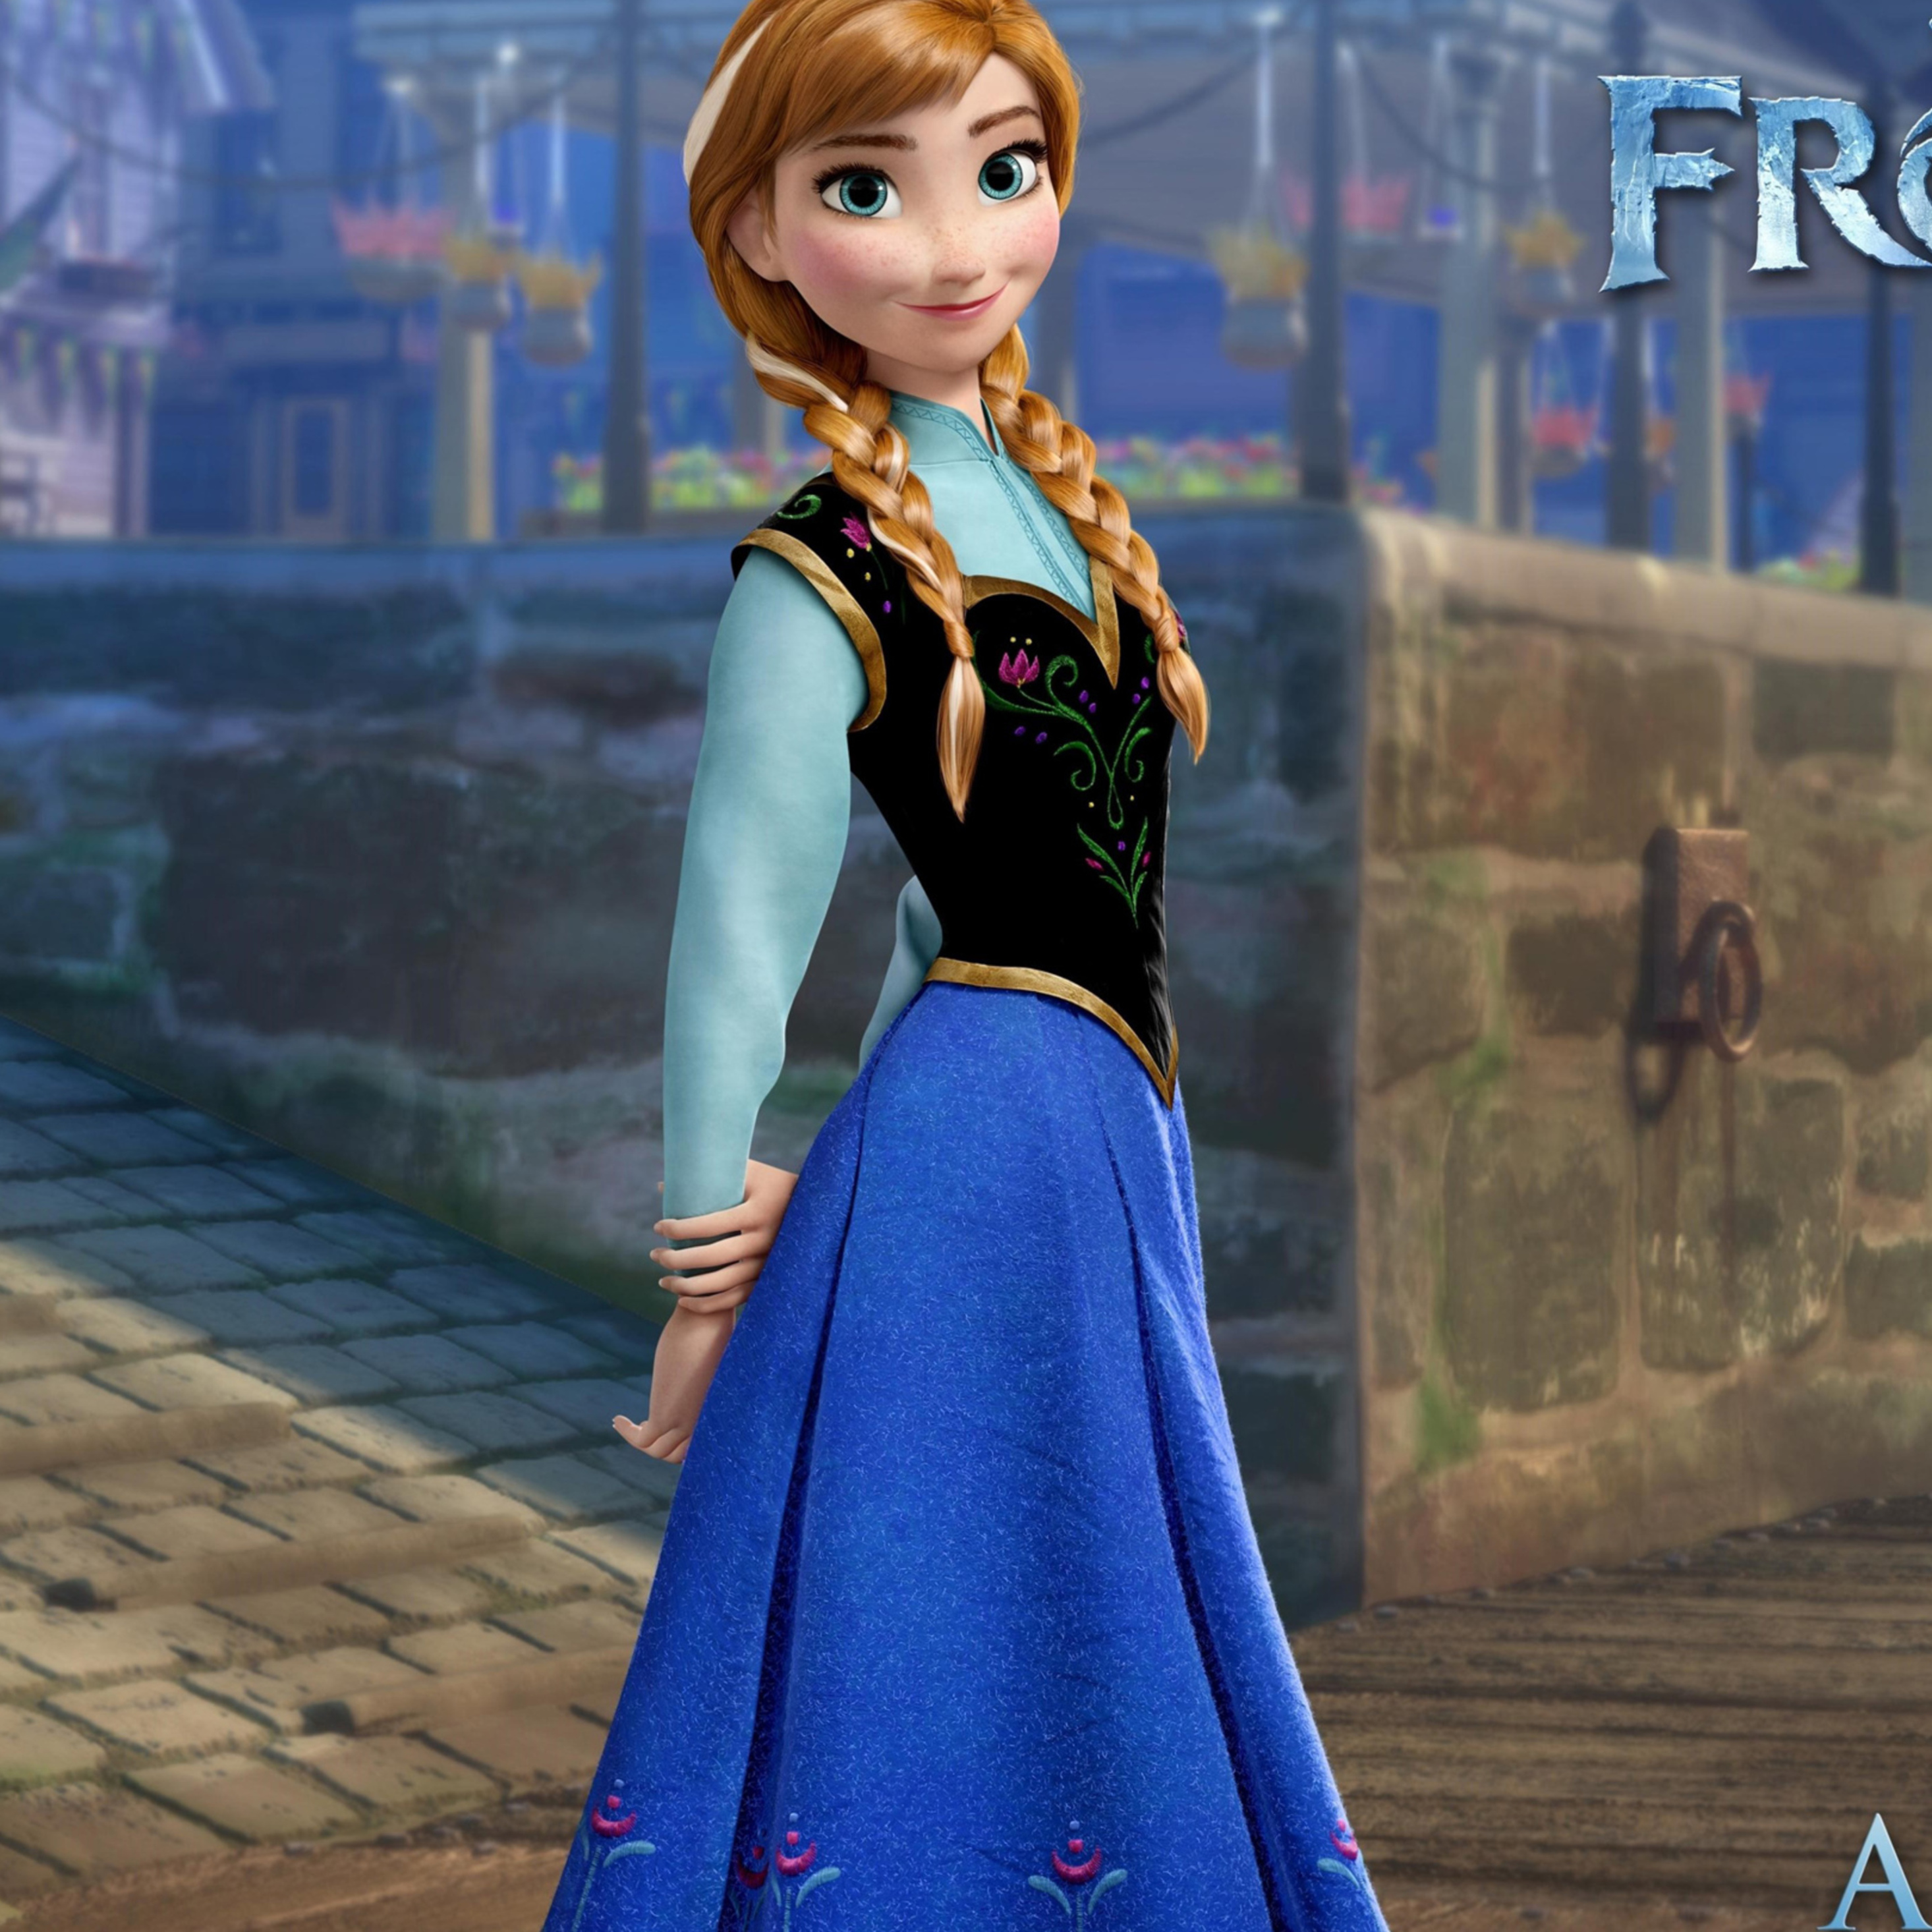 2932x2932 Frozen Anna Ipad Pro Retina Display HD 4k Wallpapers, Images,  Backgrounds, Photos and Pictures